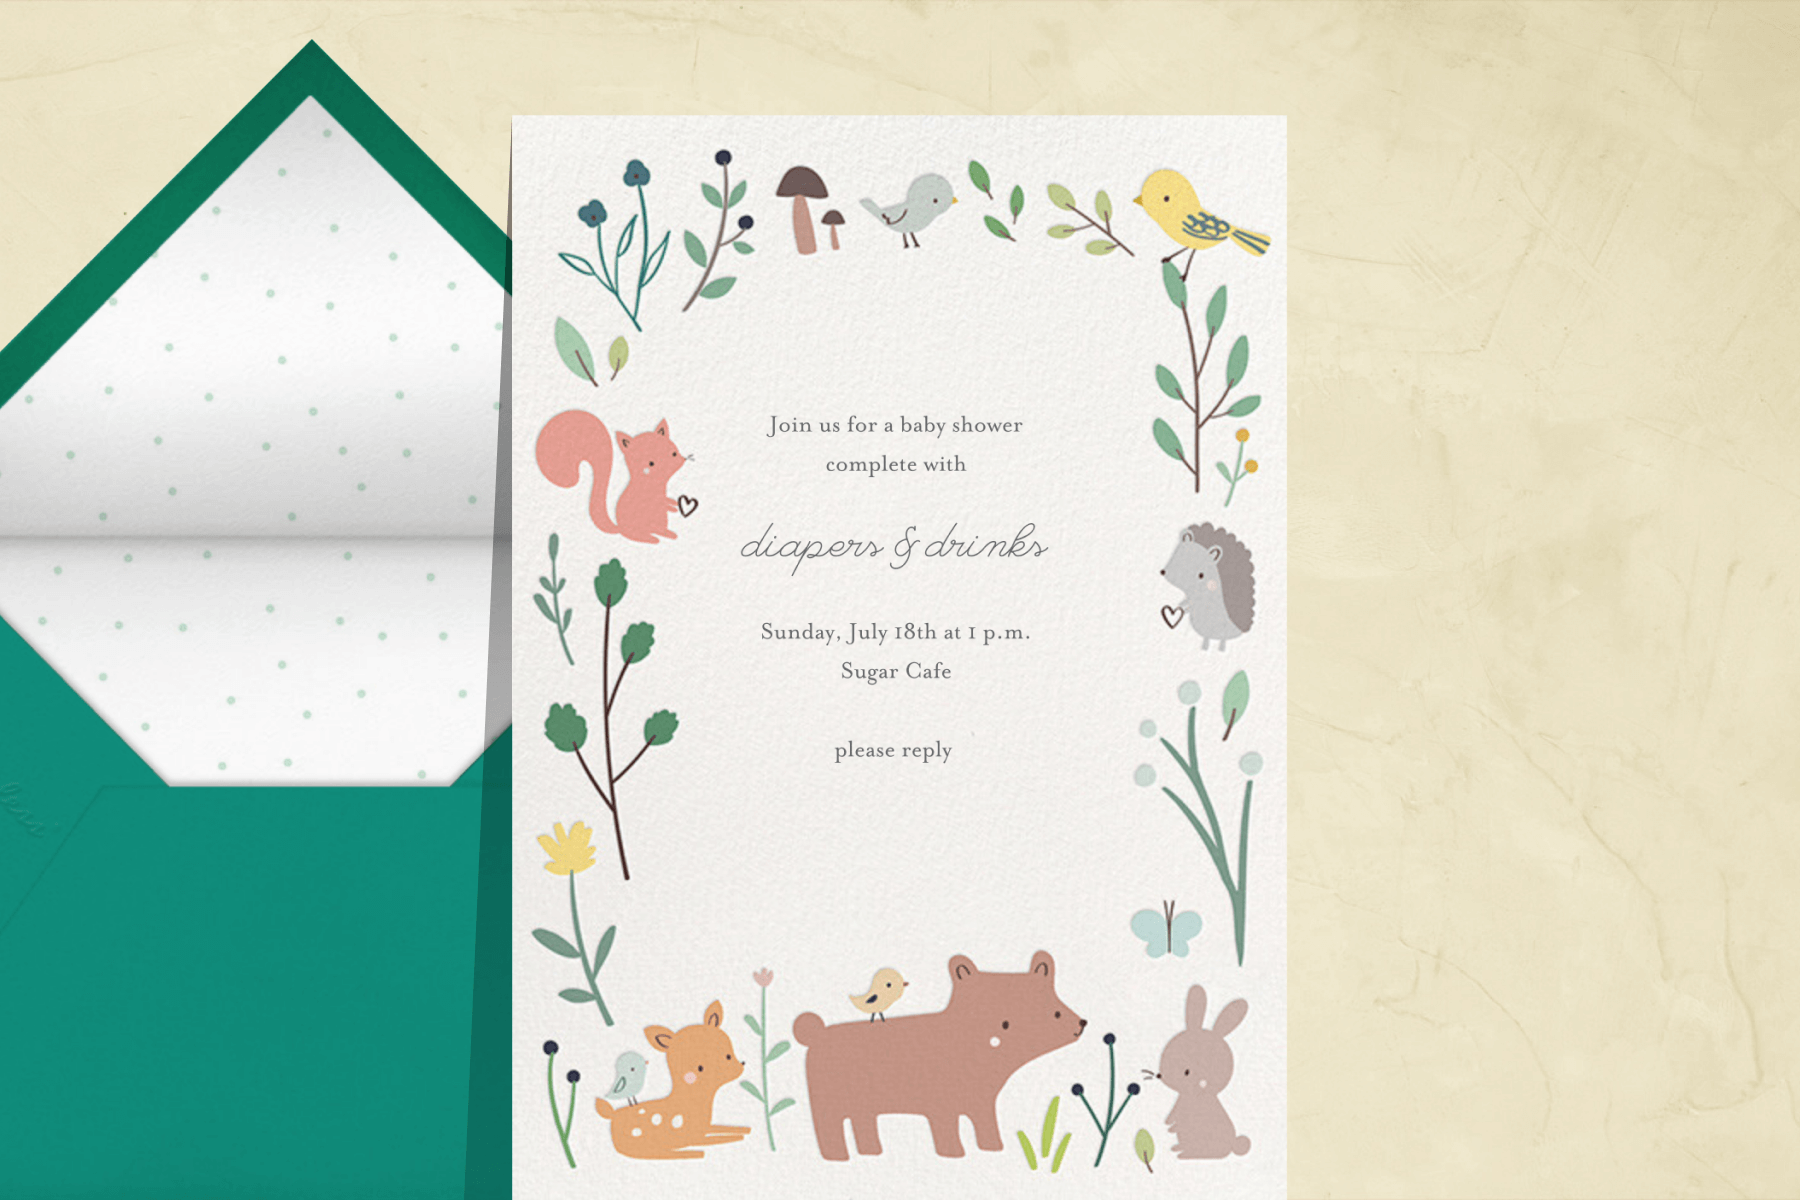 A baby shower invitation with illustrated baby woodland creatures